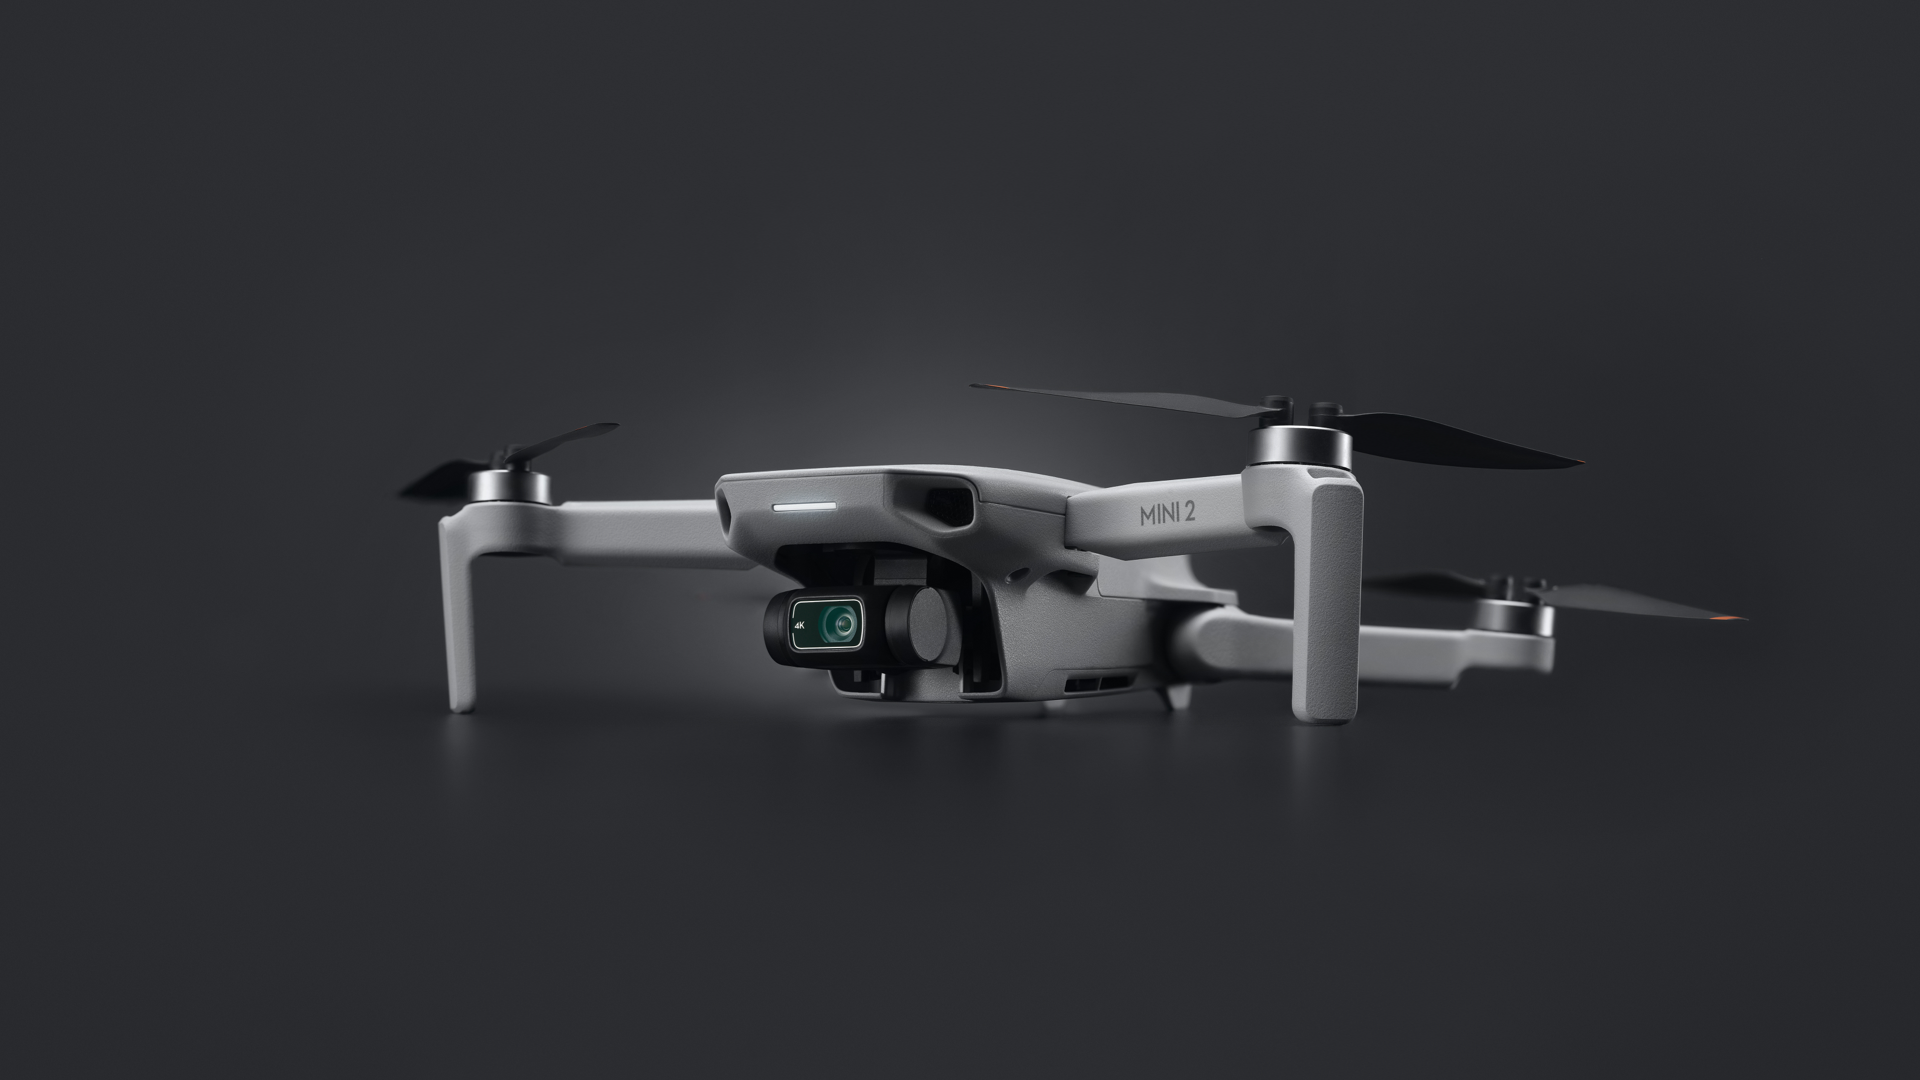 DJI Fly 1.2 includes image of Mini 2 & remote [APK Insight]